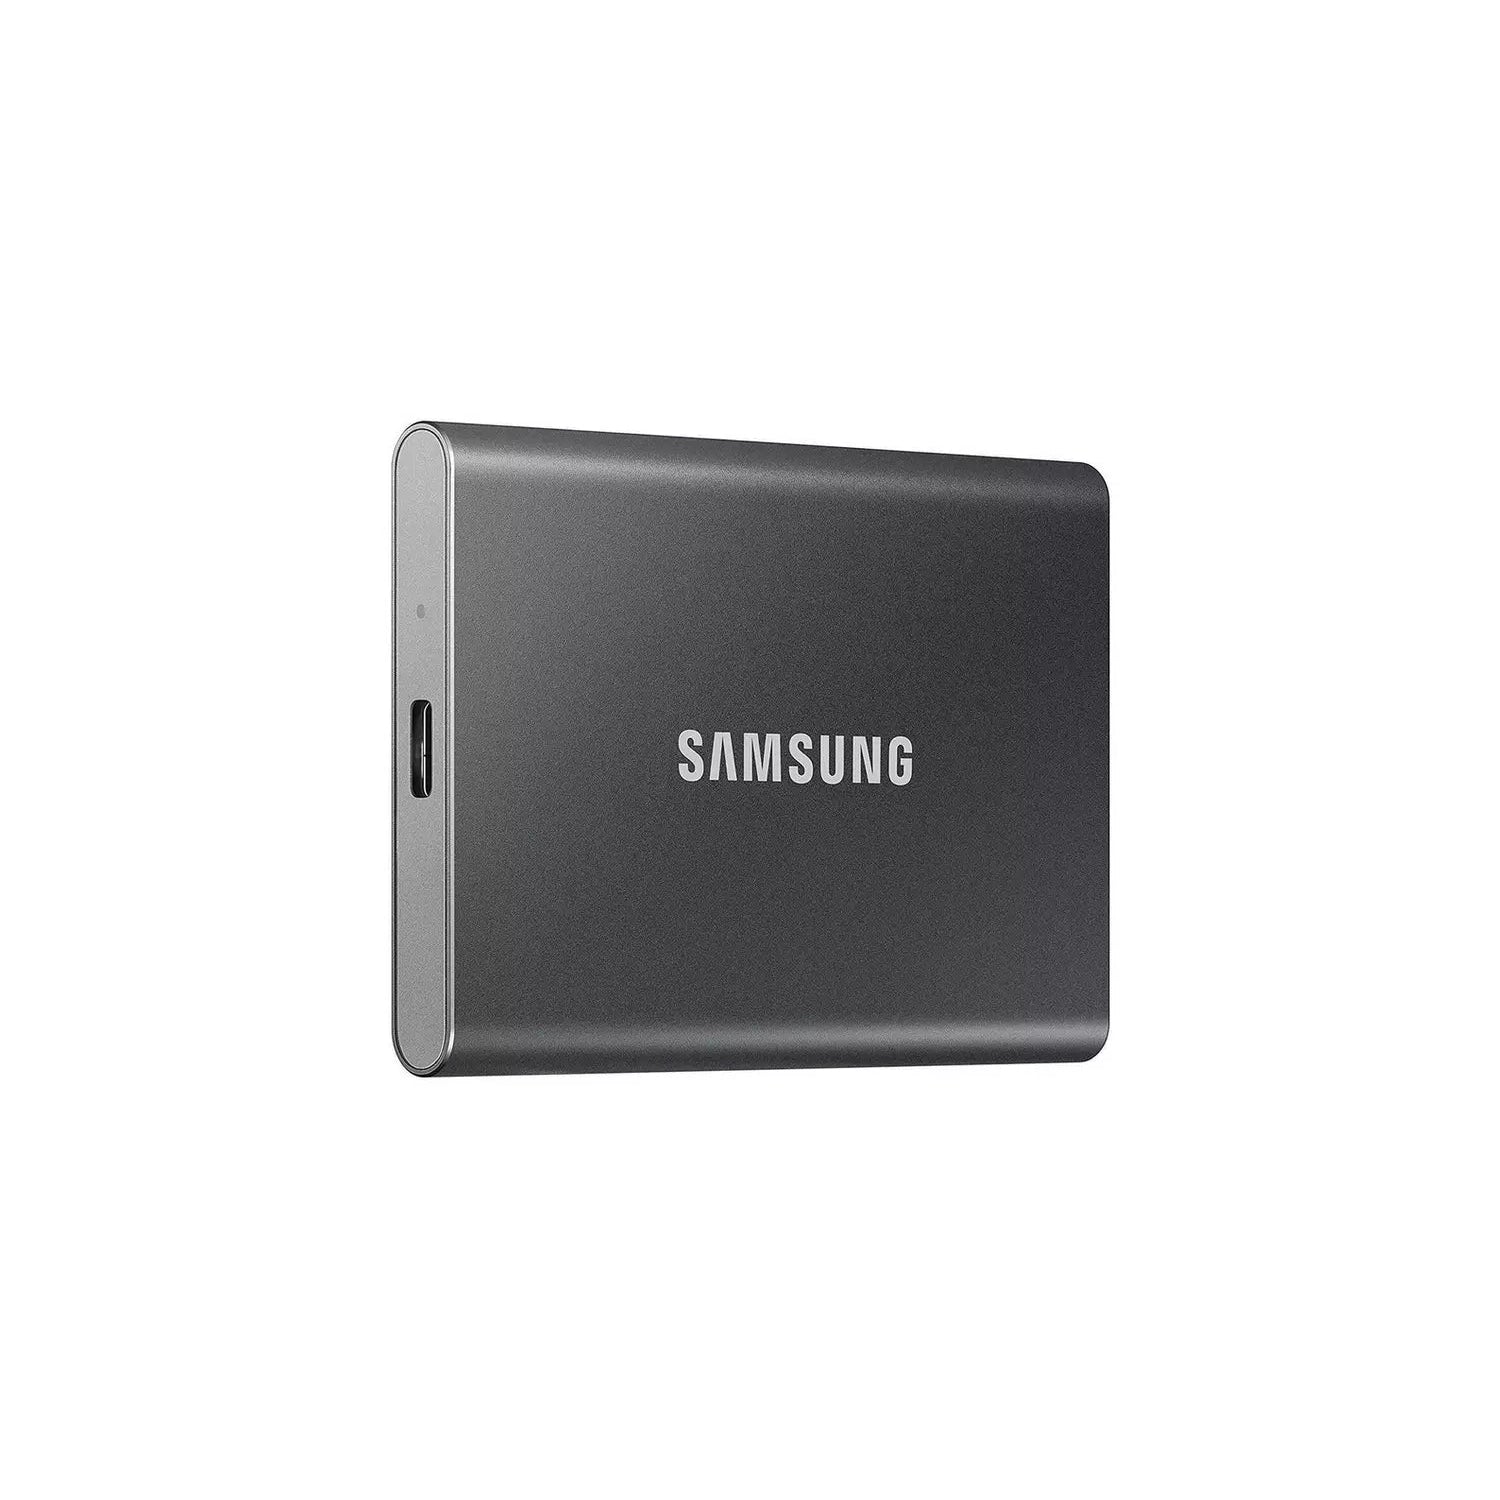 Samsung T7 USB 3.2 Gen 2 Portable Solid State Drive Hard Drive